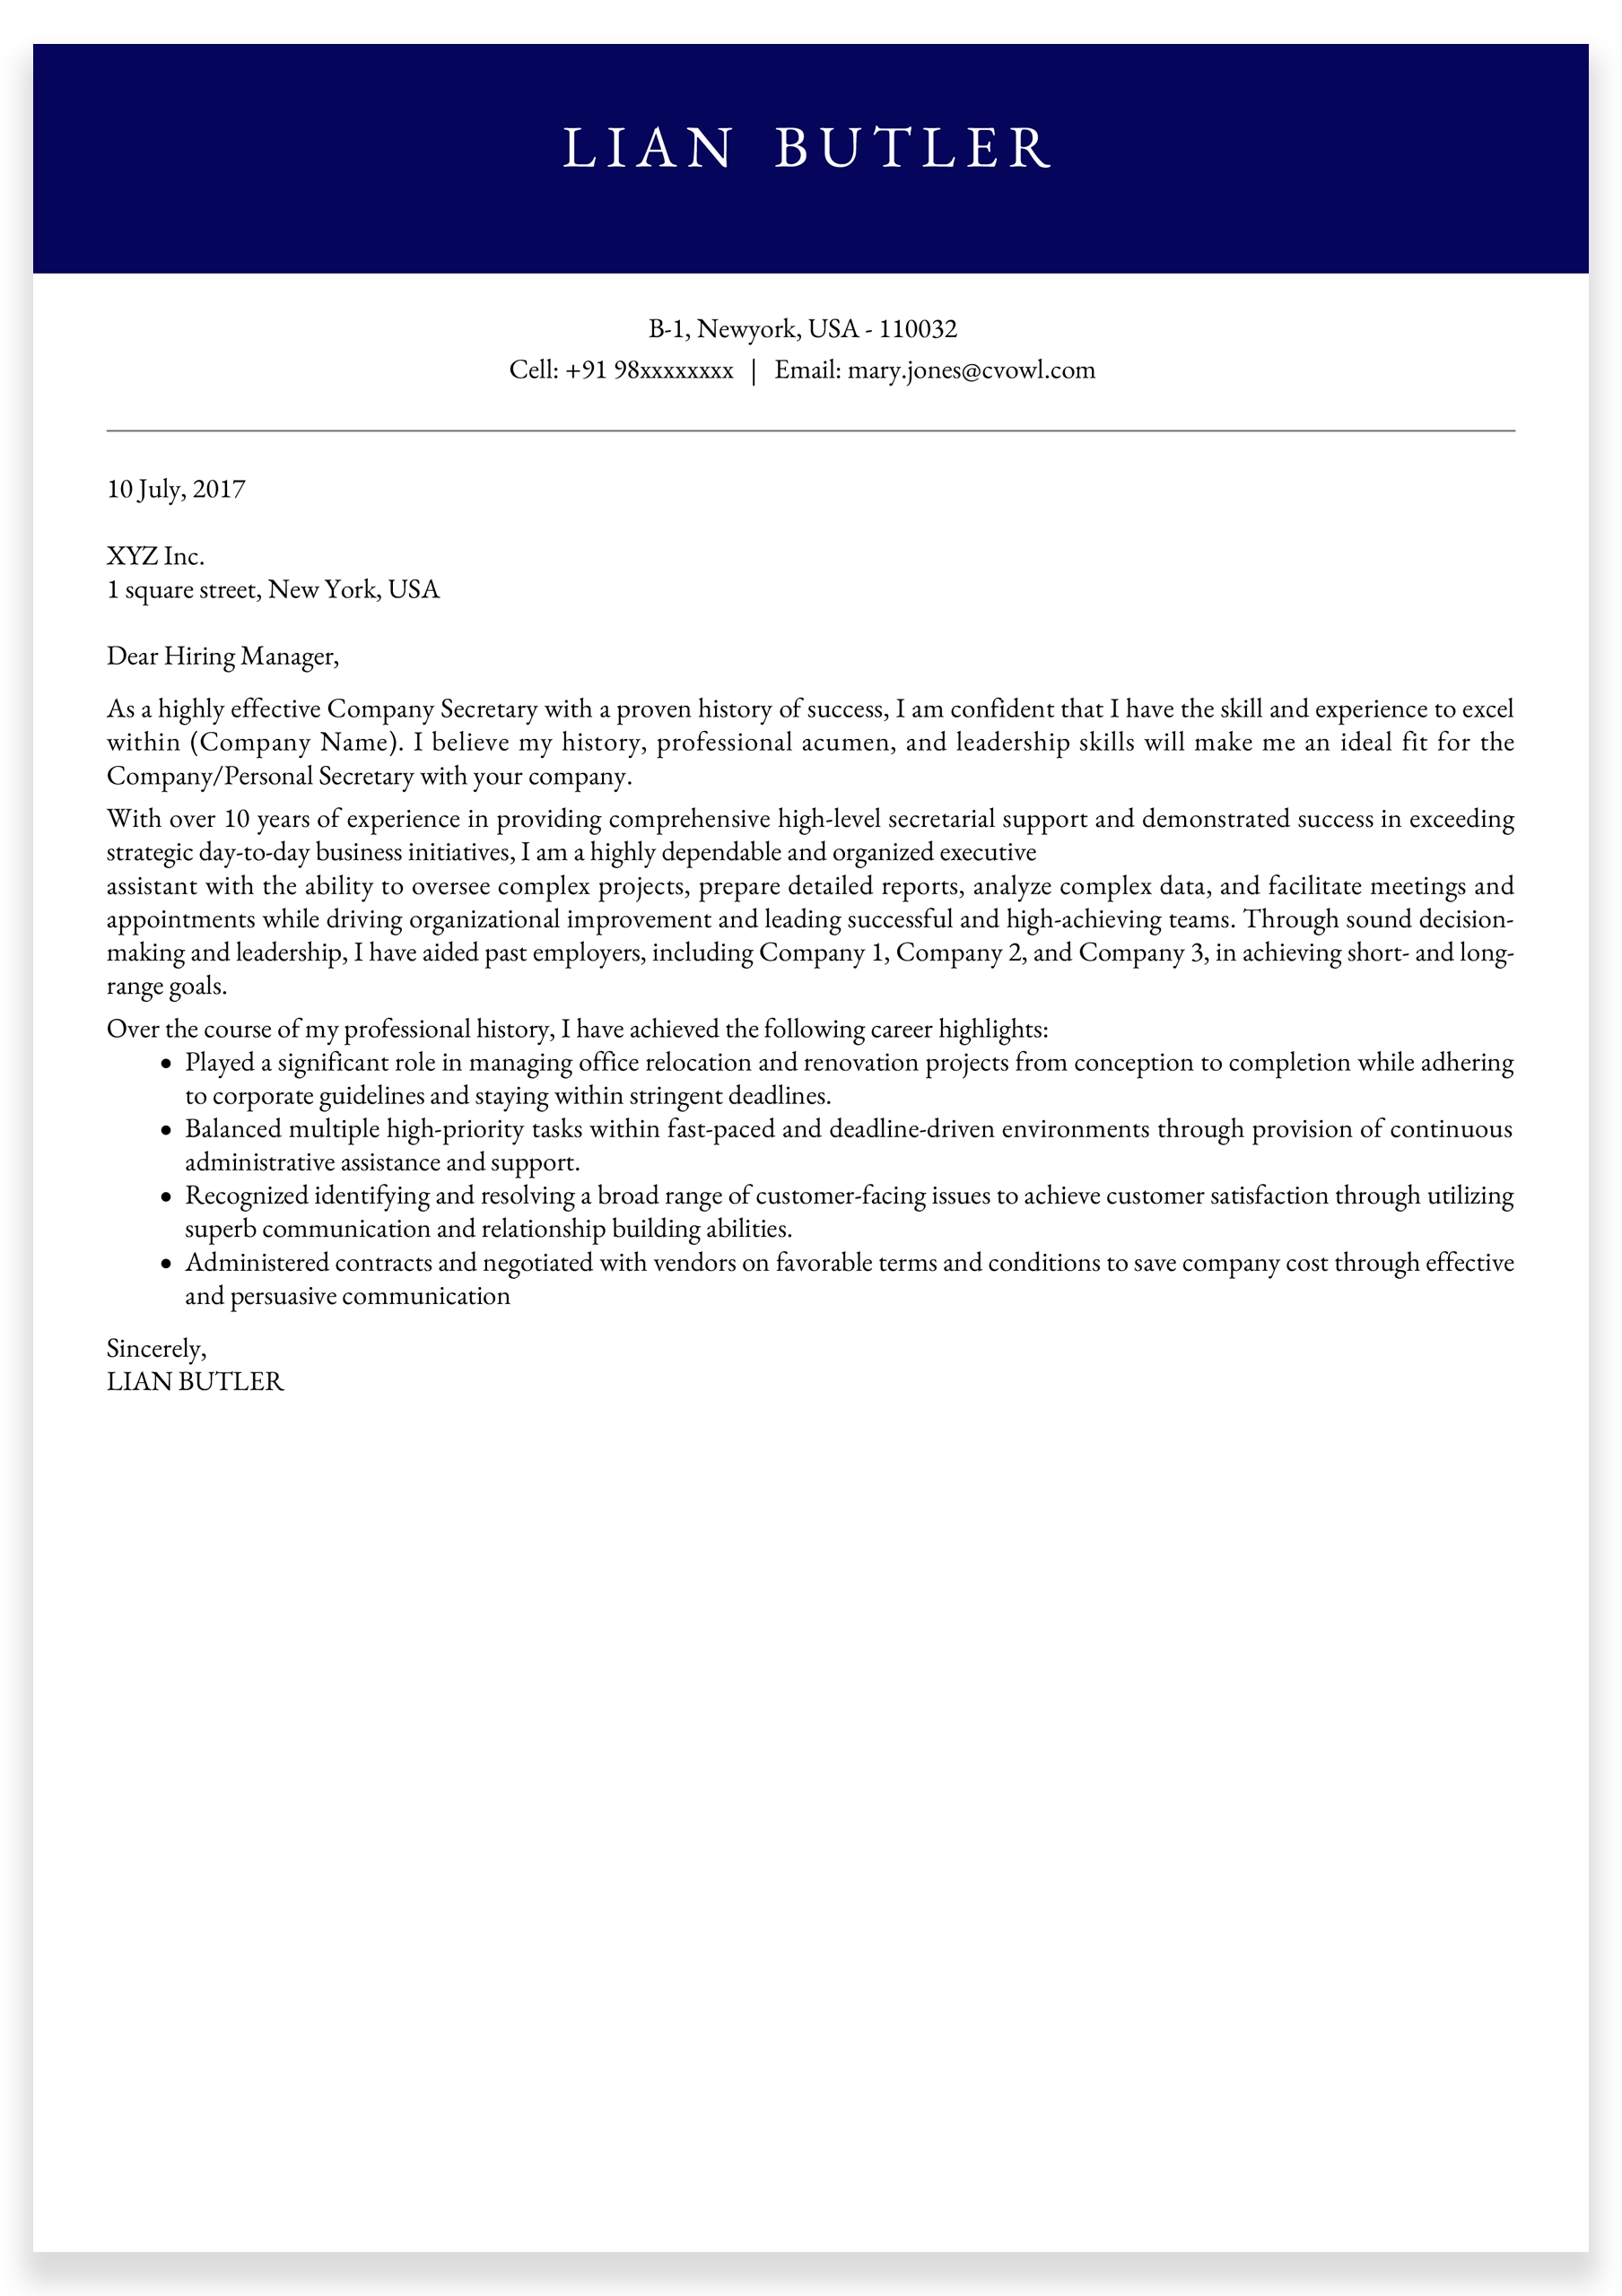 Electrical-Technician-Cover-Letter-sample8